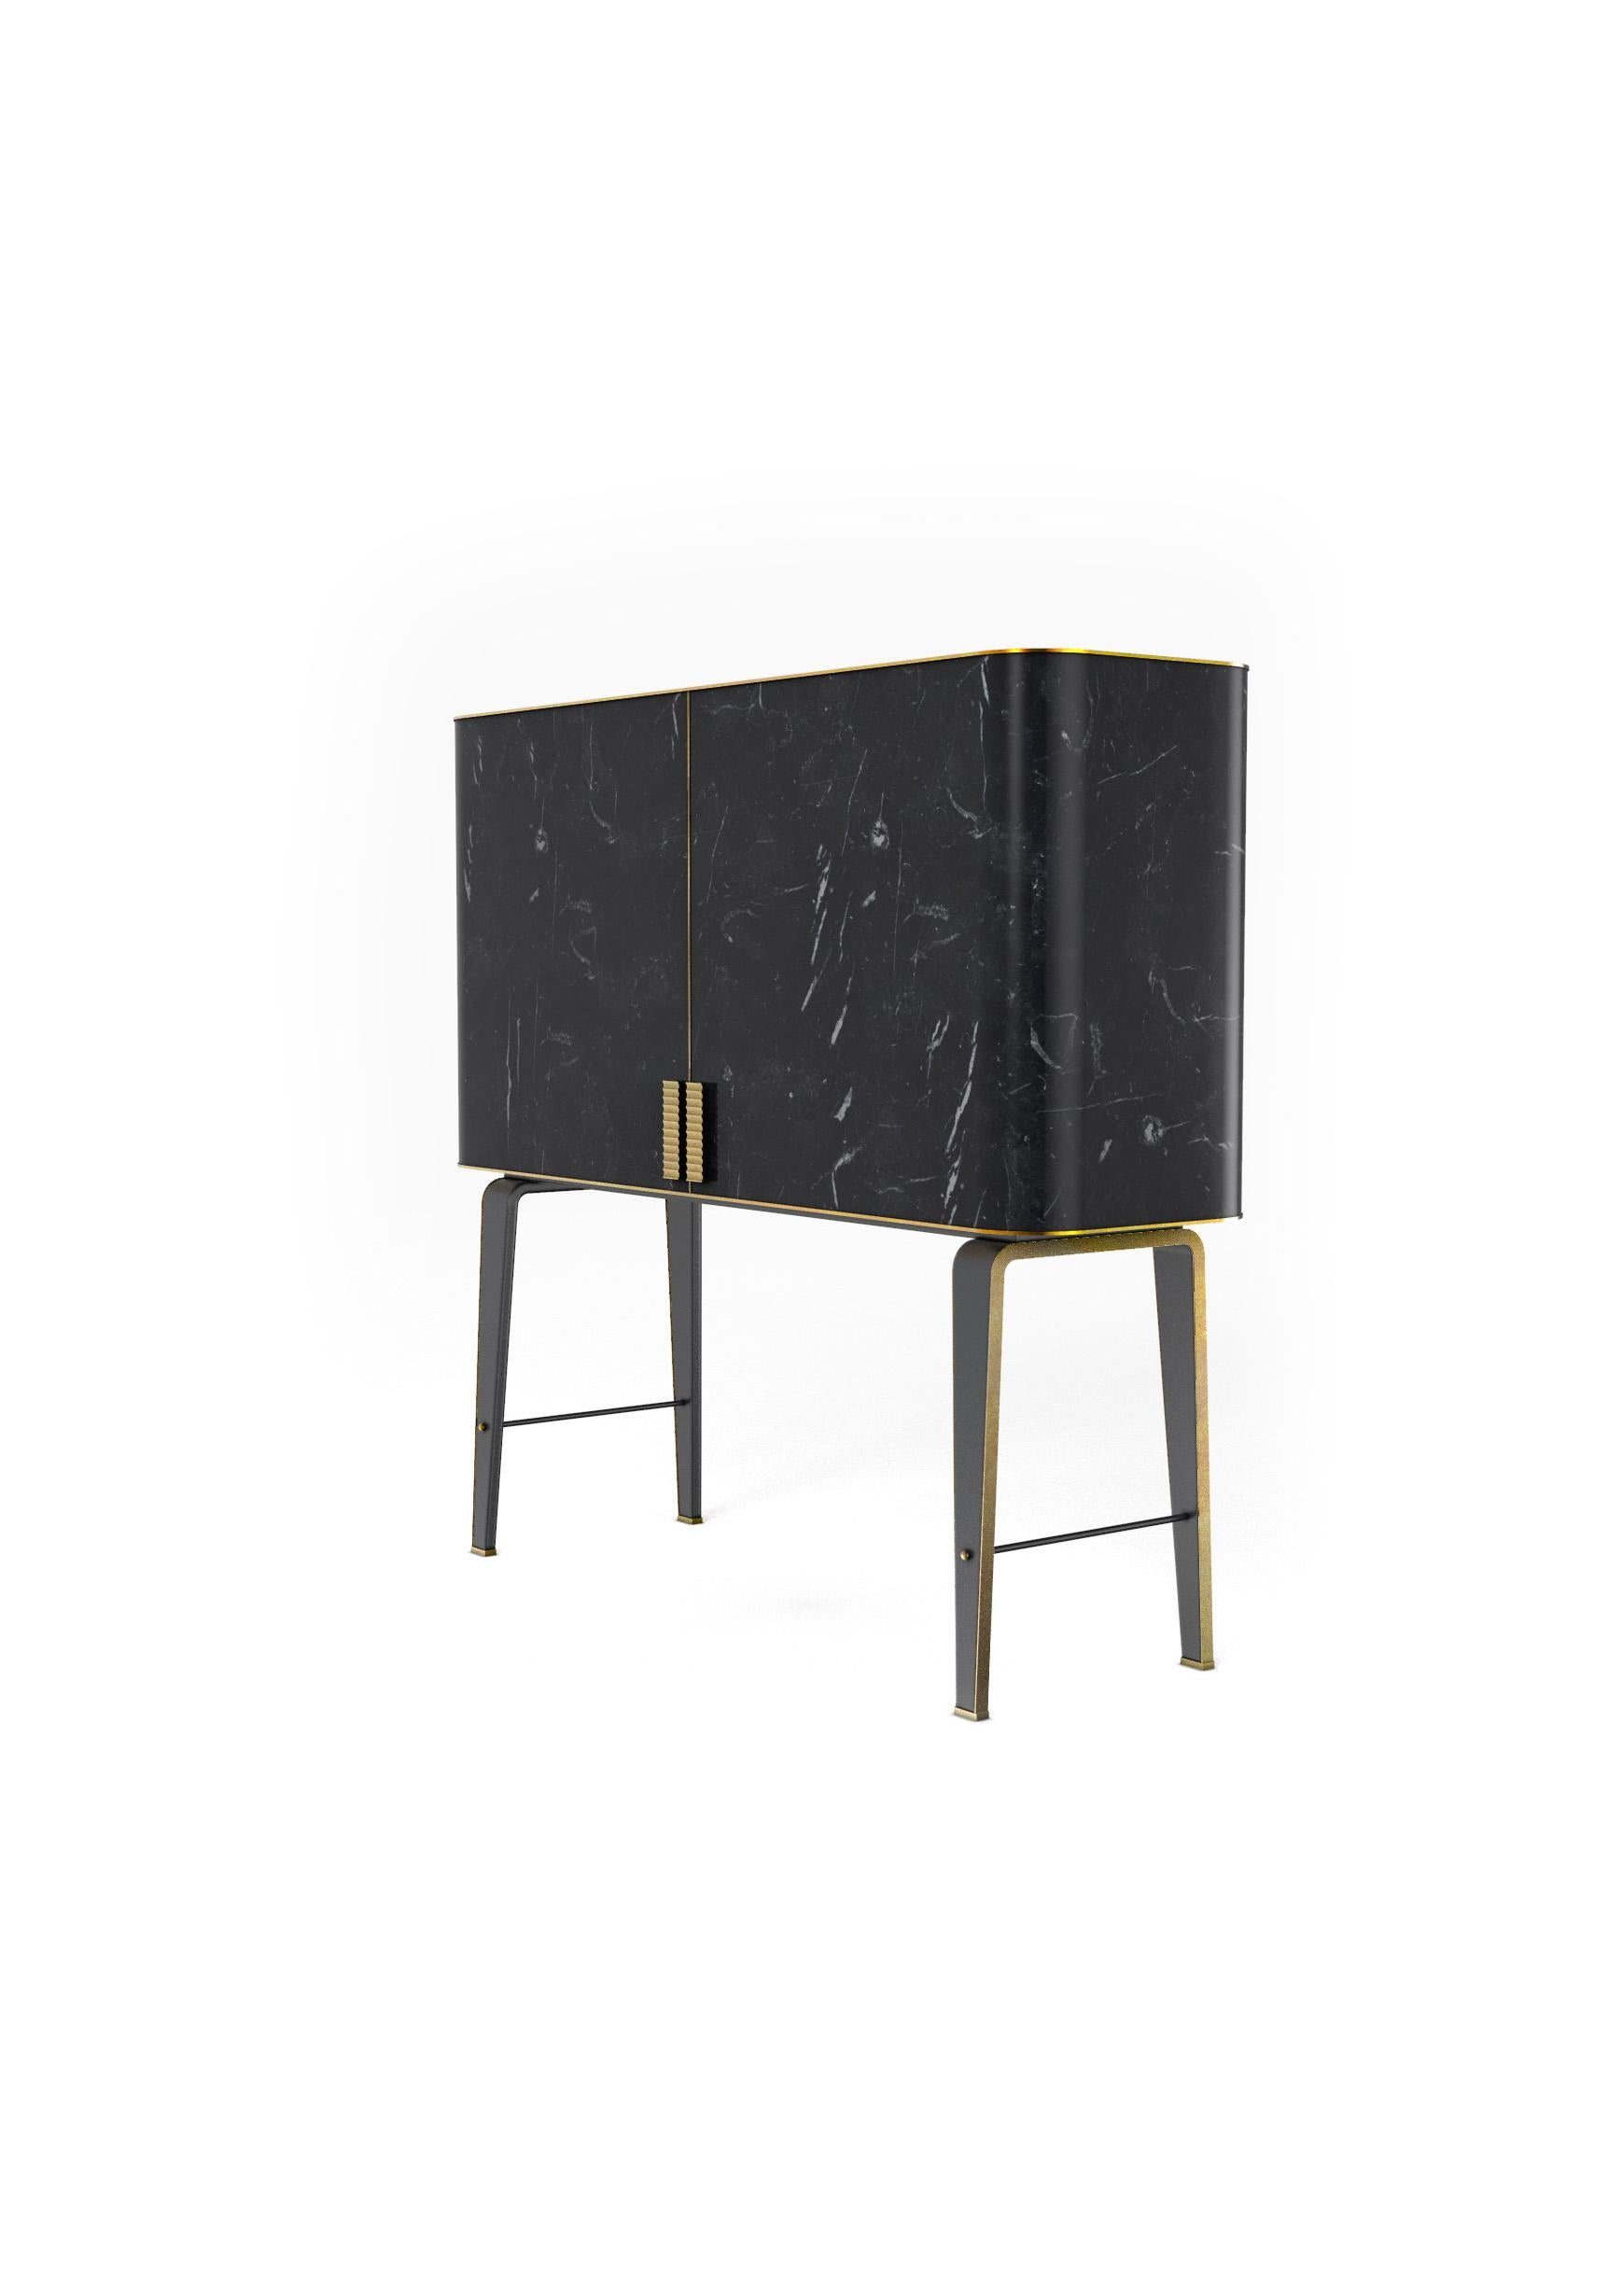 EOS cabinet by Marmi Serafini
Materials: Marble and brass
Dimensions: D 45 x W 150 x H 140 cm.

Refined and elegant console characterized by curved marble shape and metal elements featuring the best of its original lines.

Other marbles